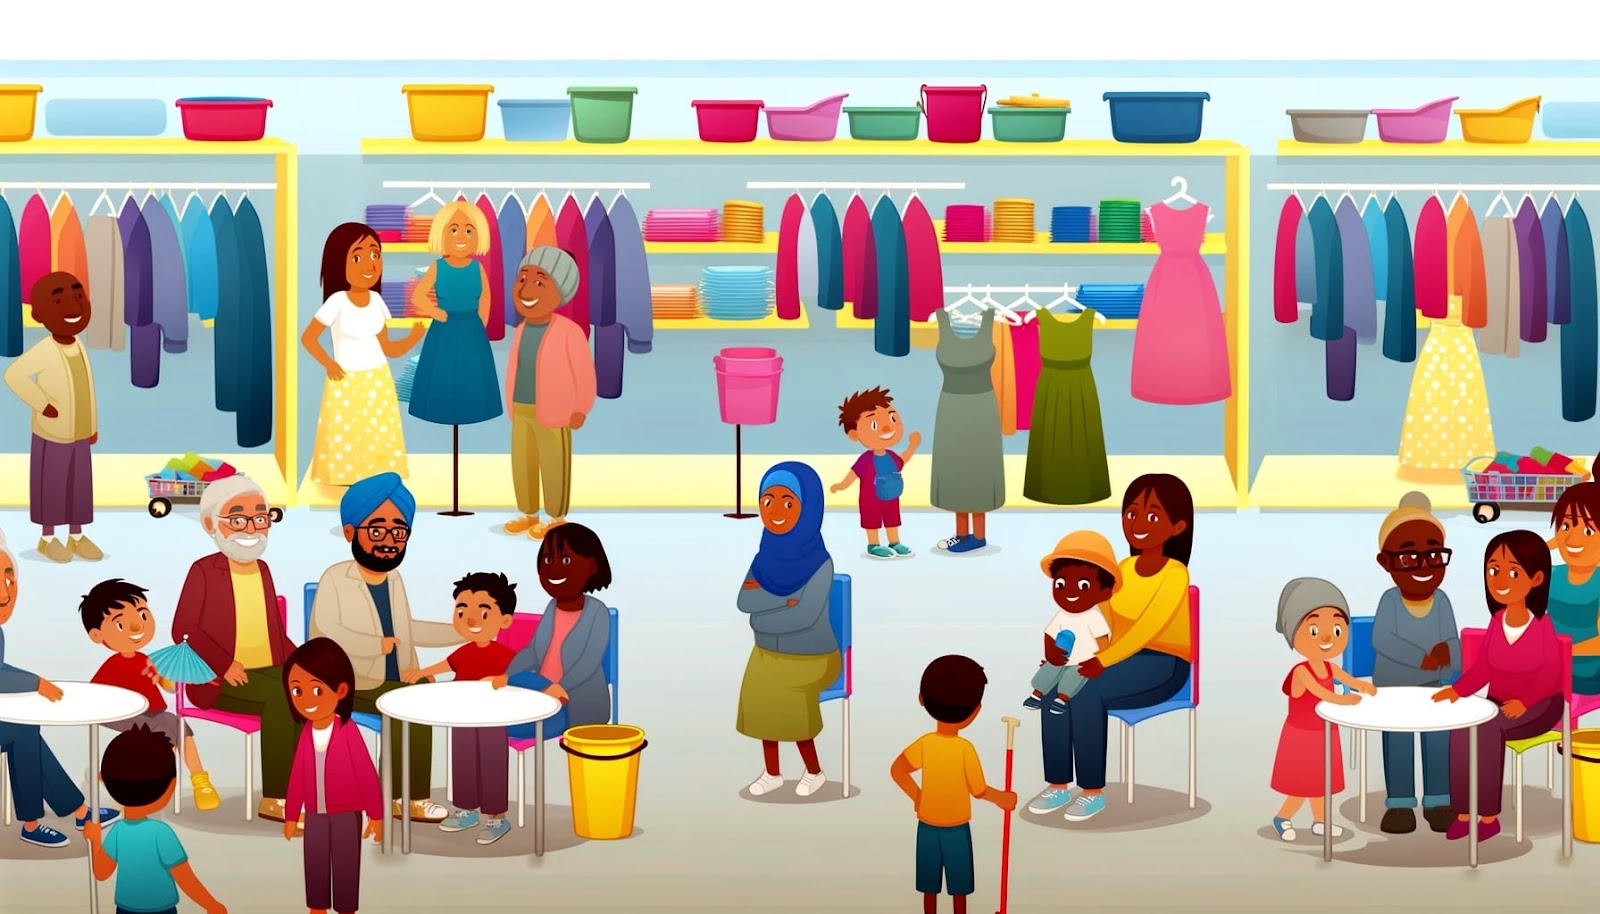 Illustration of a variety of people in a store. 